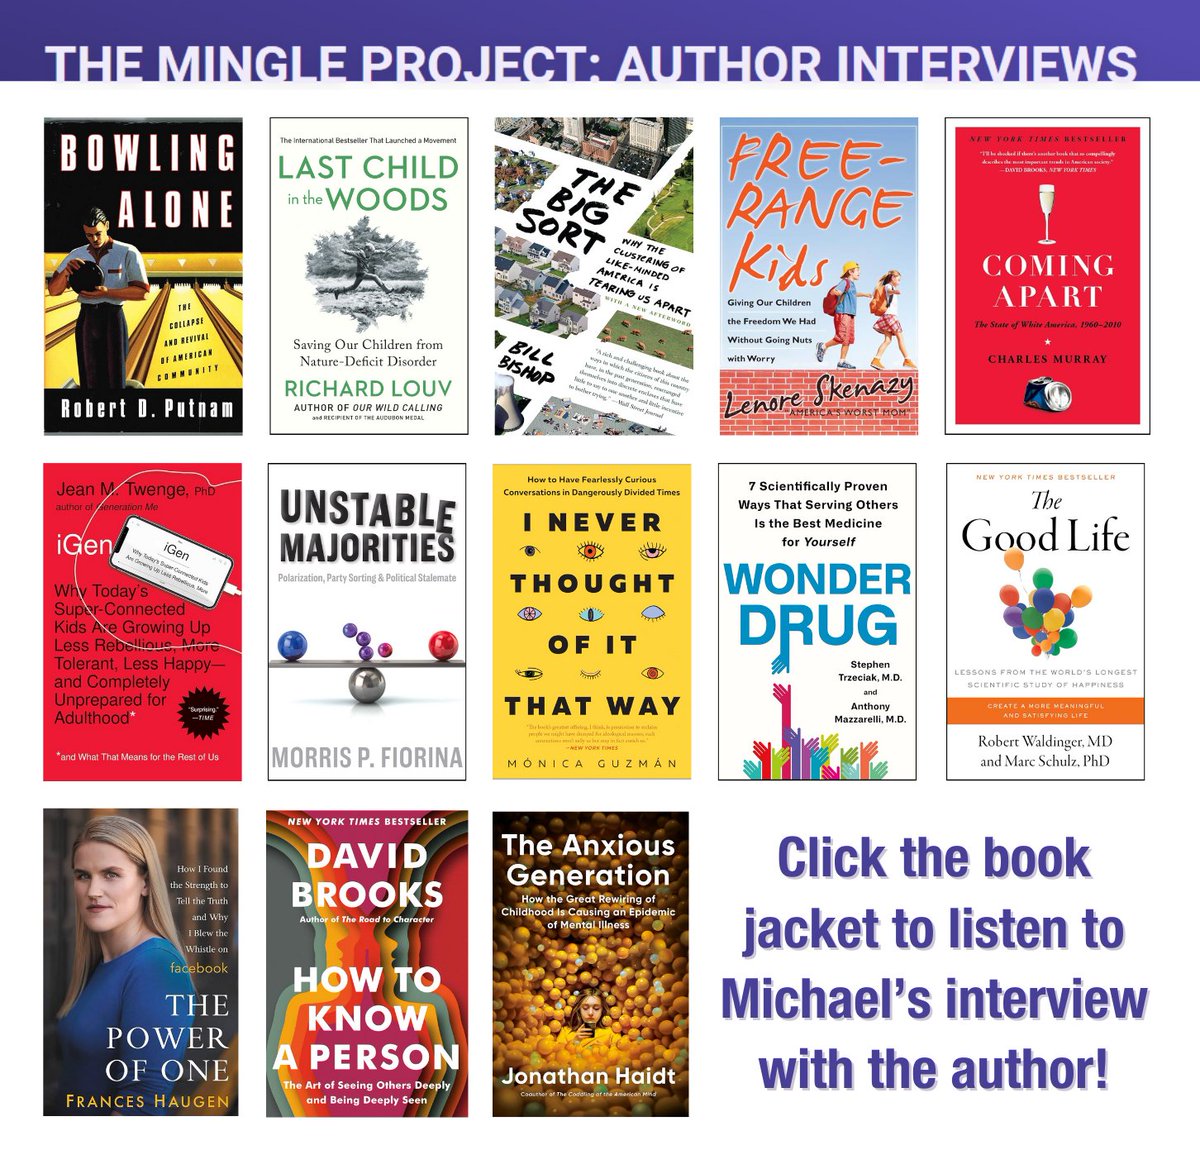 I'm excited to unveil the 'Mingle Project' page on Smerconish.com! It's a collection of author interviews on societal disconnects, featuring my chat with @JonHaidt about “The Anxious Generation,” #1 non-fiction on @nytimes best sellers 📖🎧 smerconish.com/mingle-project ⬅️